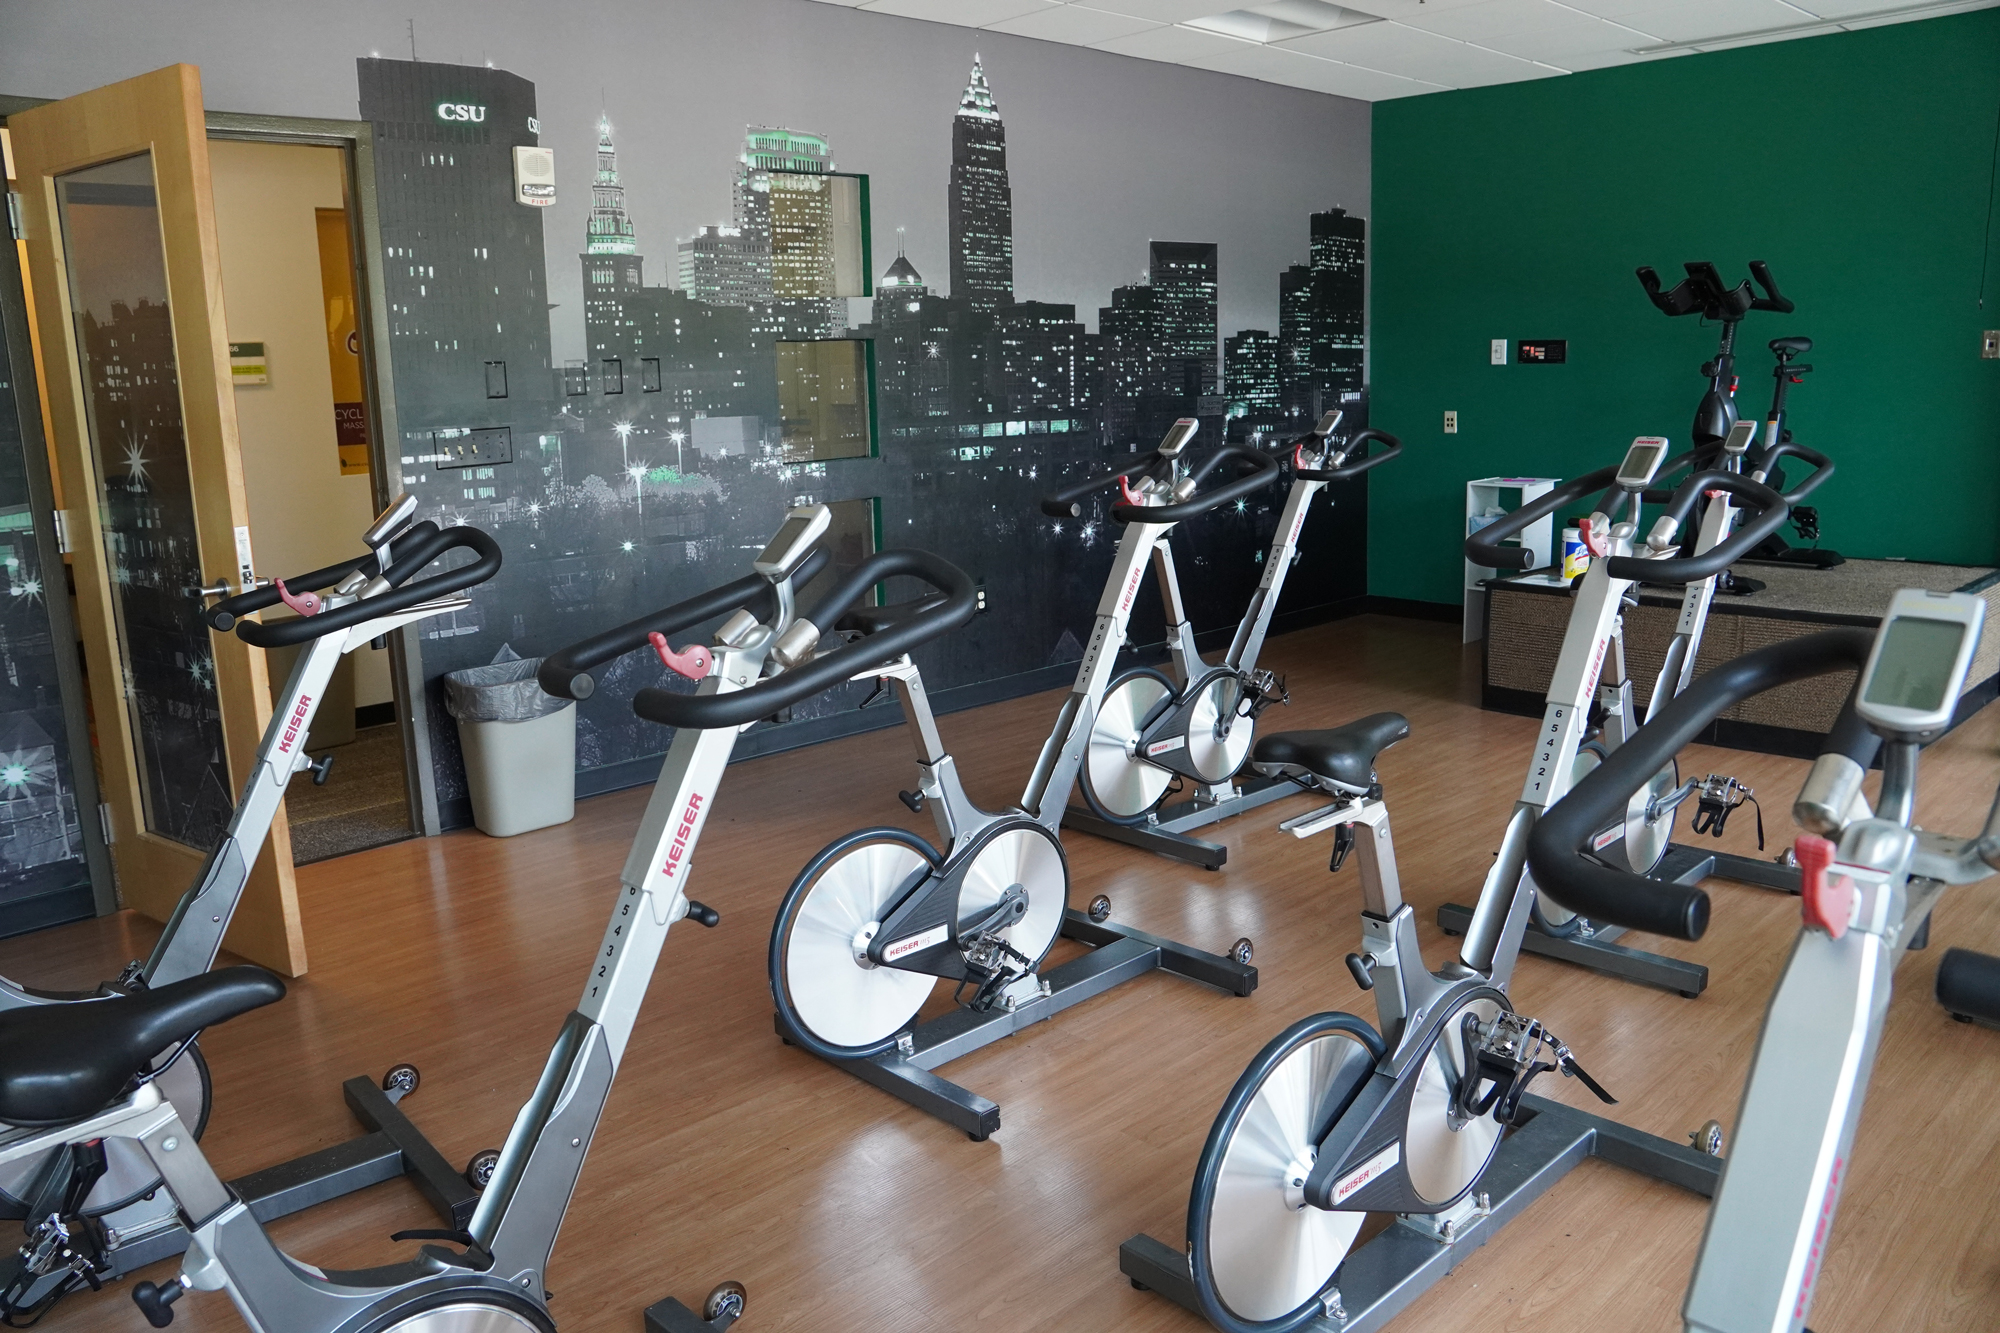 cycling studio with Cleveland skyline mural wall